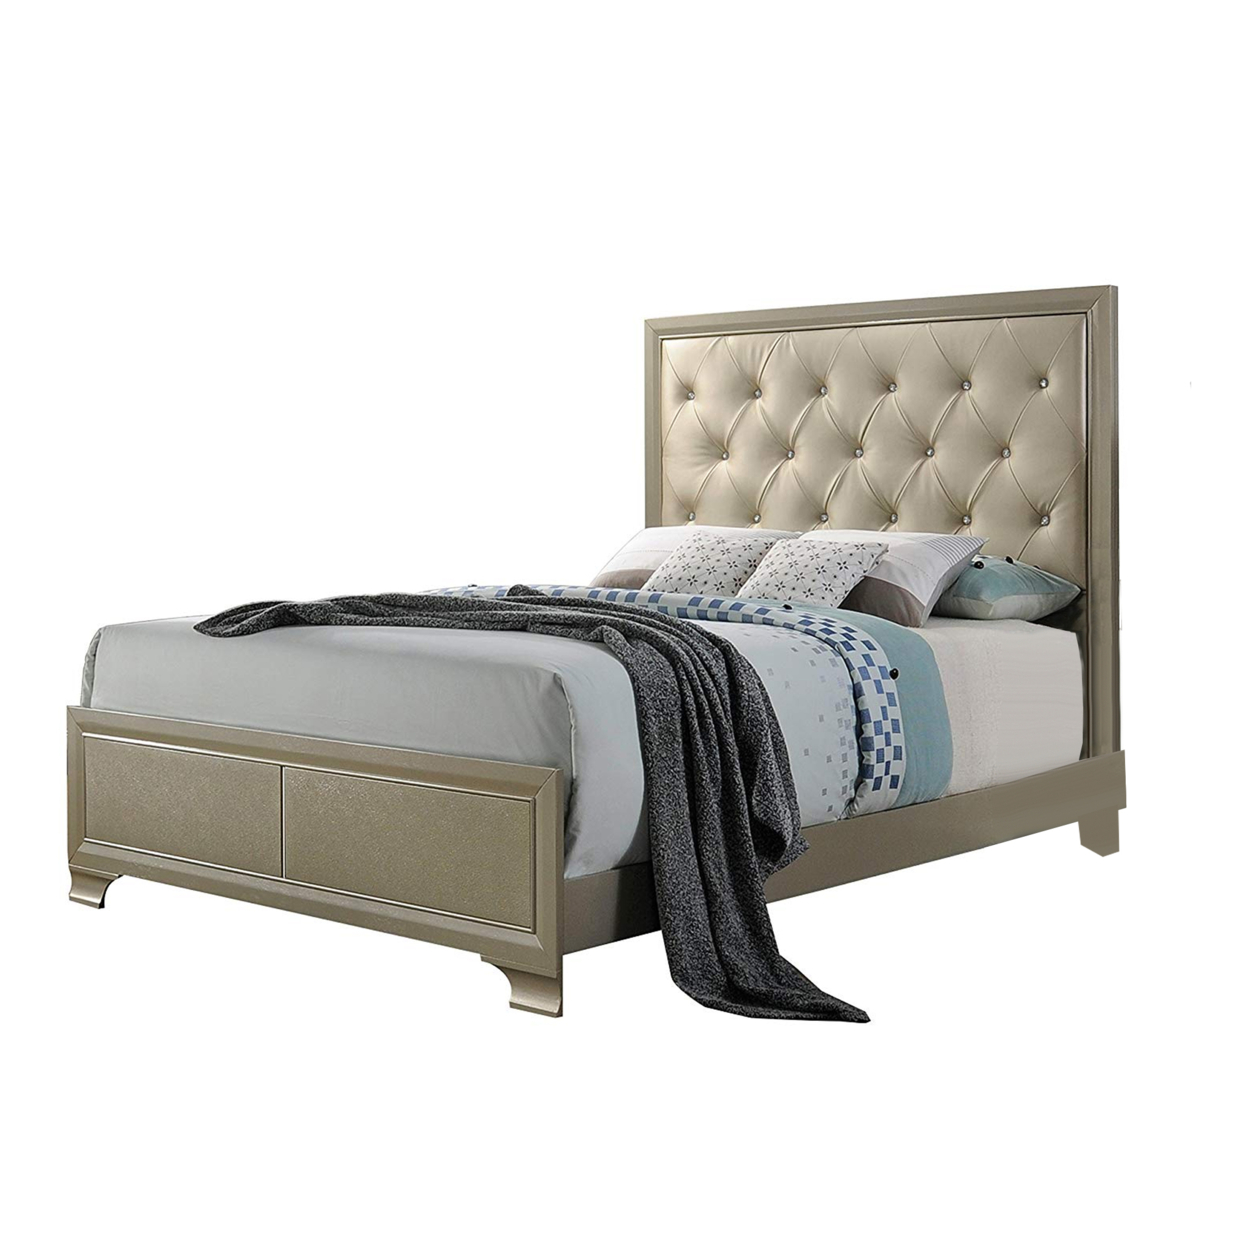 Wooden Queen Size Bed With Bracket Legs And Faux Leather Tufted Headboard, Beige And Gold- Saltoro Sherpi